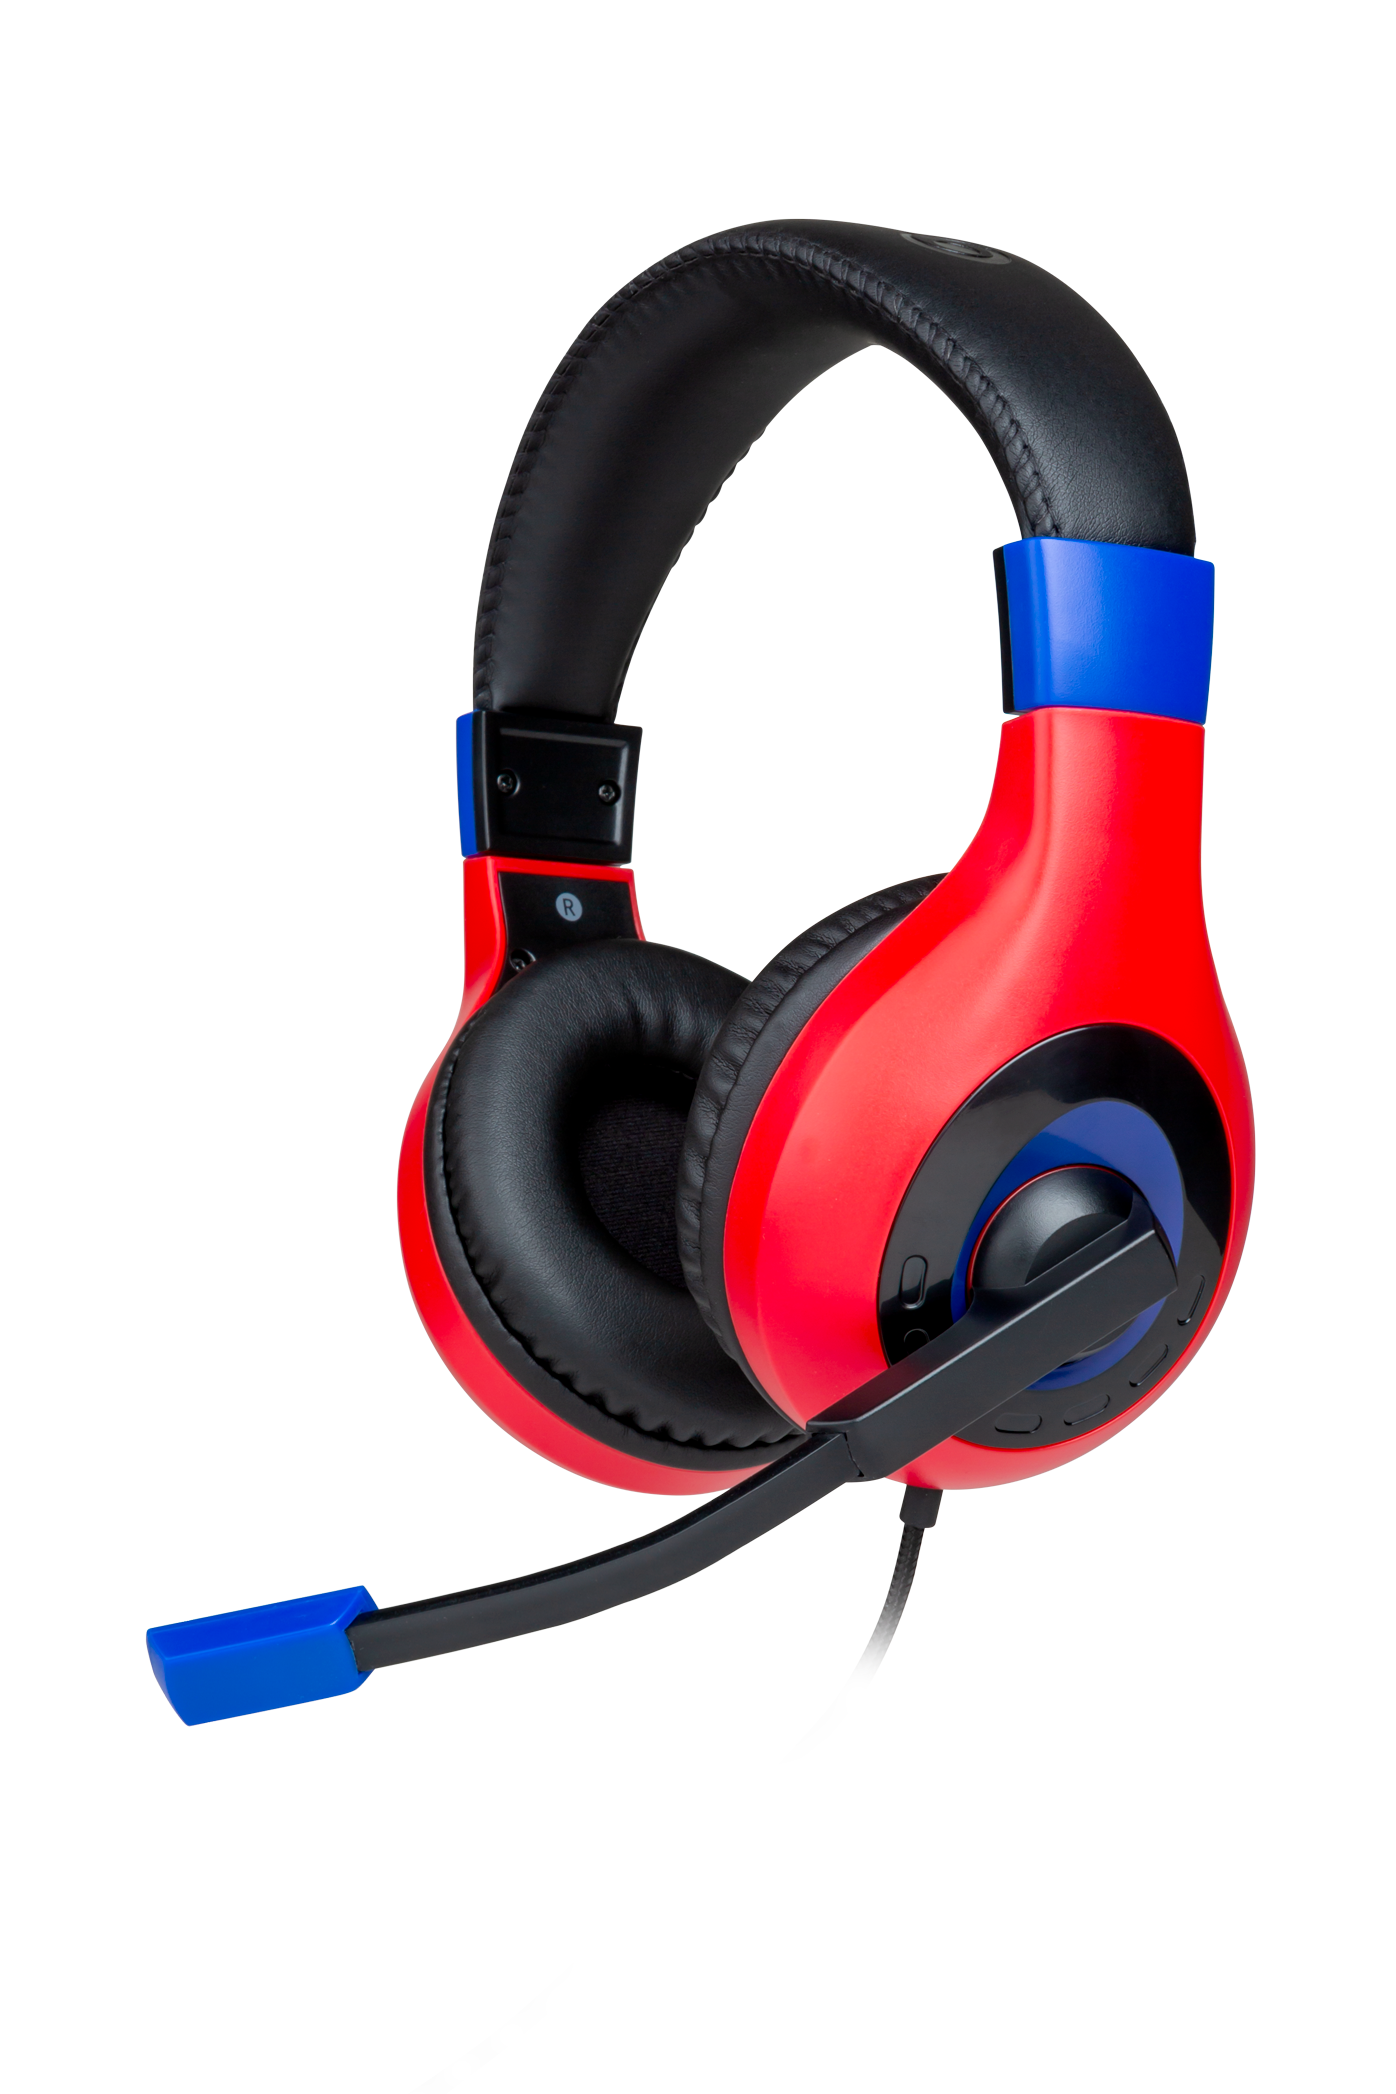 BigBen Wired Stereo Gaming Headset V1